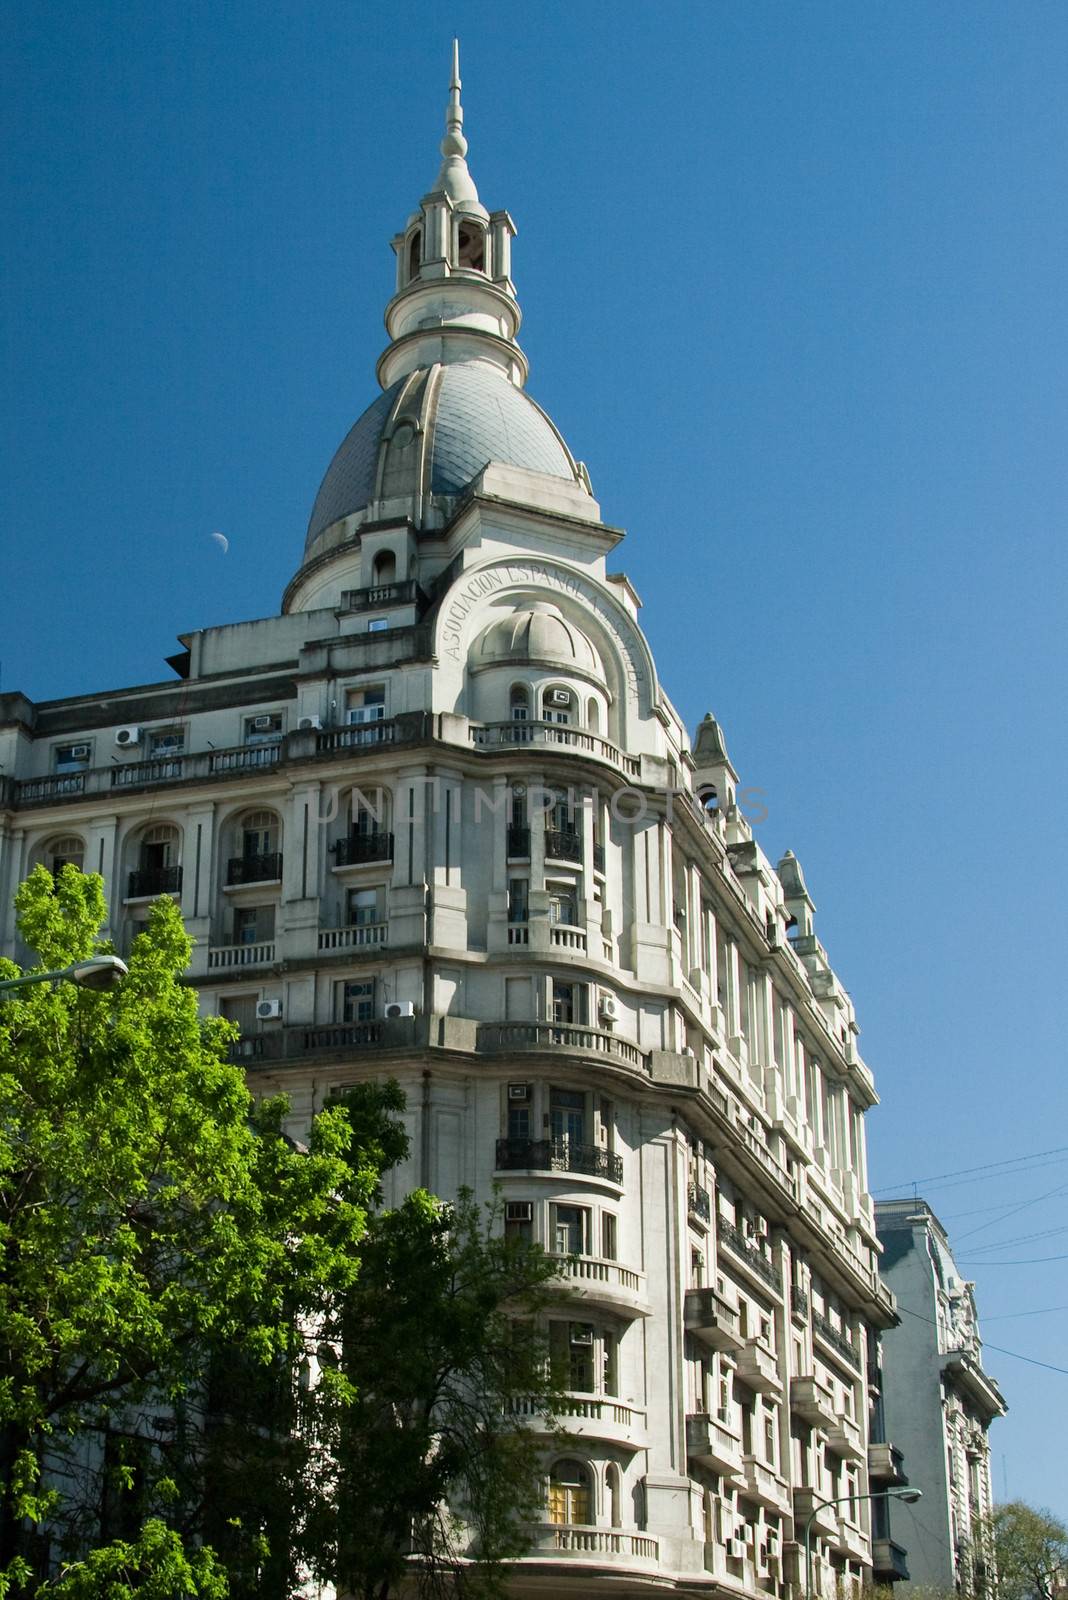 Low angle view of a building, Microcentro, Buenos Aires, Argentina